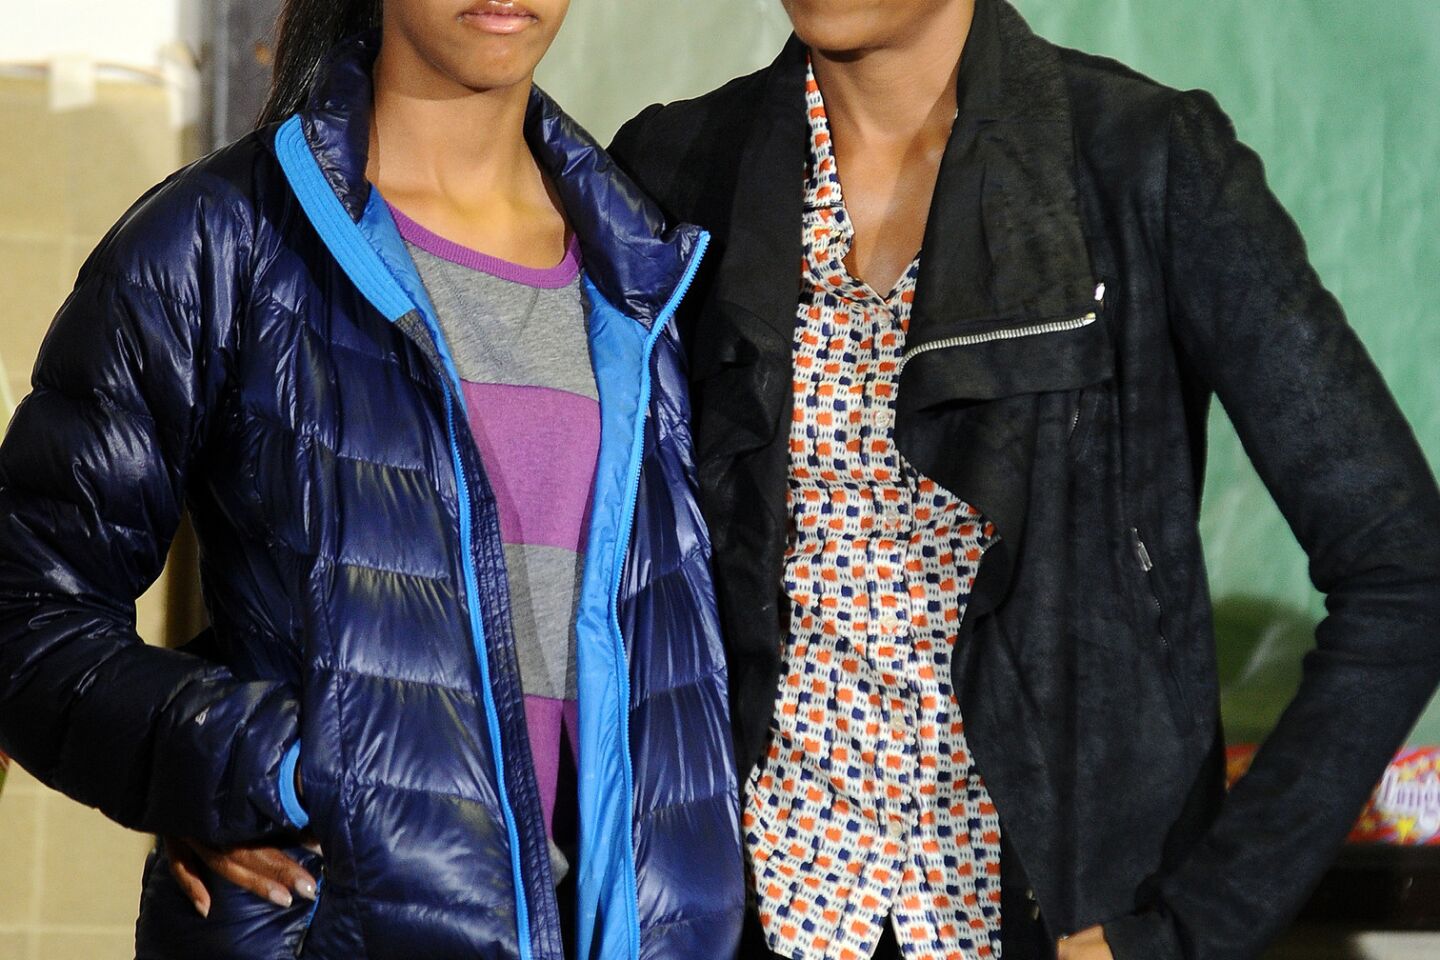 First Lady Michelle Obama, in a casual print top, textured leather jacket and dark jeans, and daughter Malia listen as President Obama speaks to volunteers at the Browne Education Center in Washington in January of 2012.